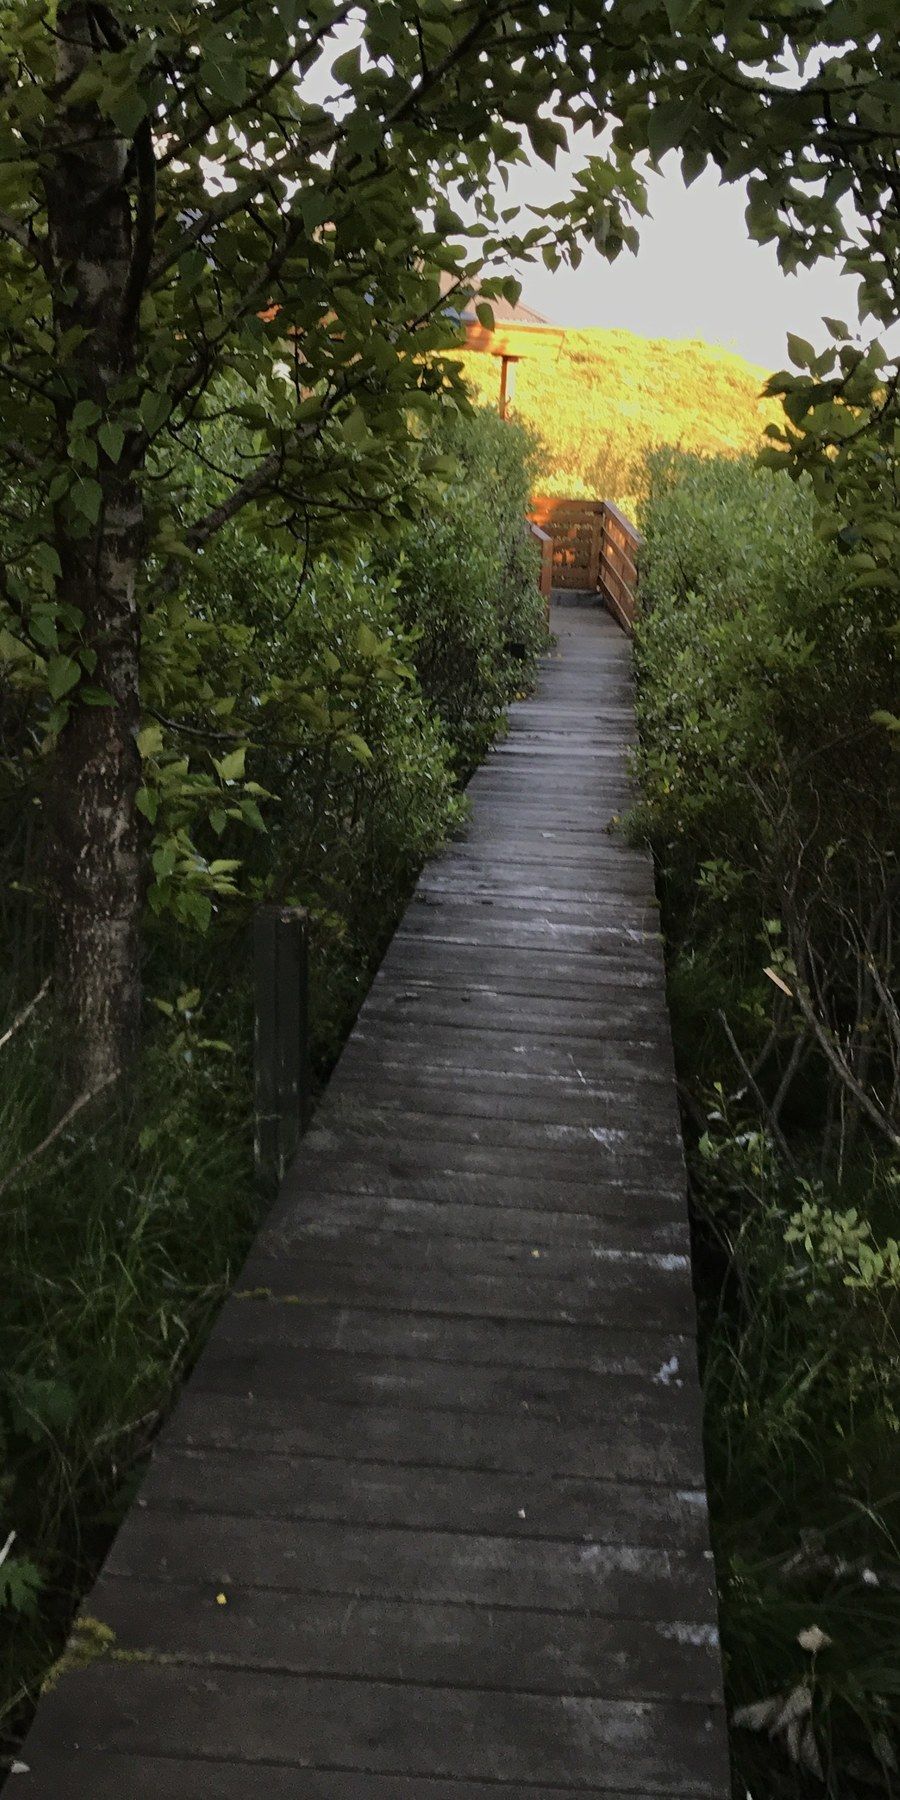 The way to the cottage leads along a boardwalk between birch trees